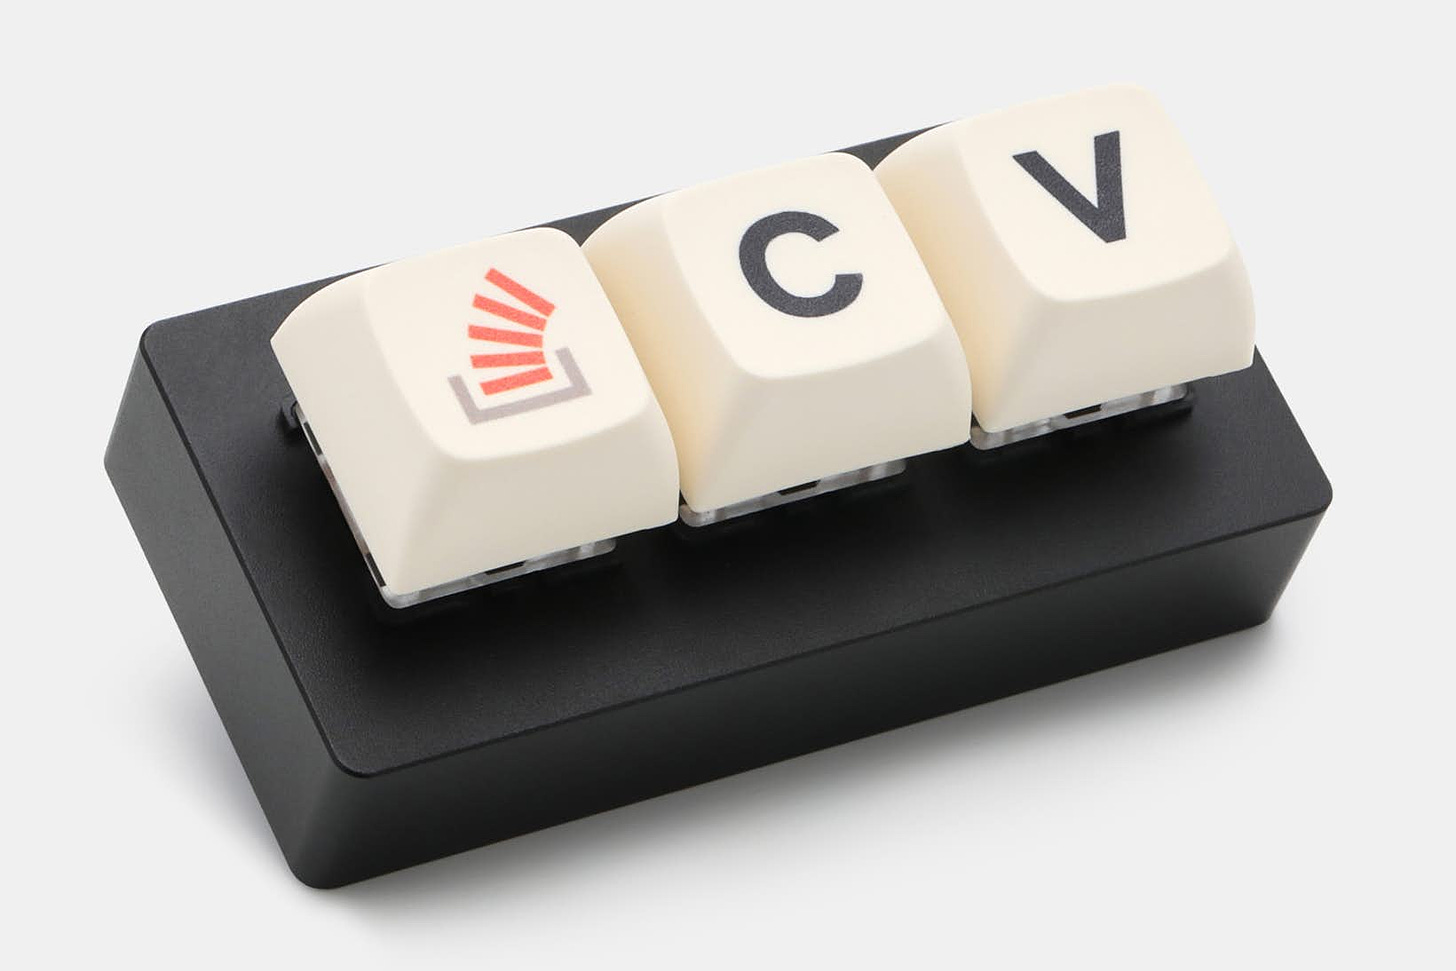 https://massdrop-s3.imgix.net/product-images/stack-overflow-the-key-macropad/FP/jVRhRp6oQoGOSx6dovN5_2607.jpg?auto=format&fm=jpg&fit=fill&w=820&h=547&bg=f0f0f0&dpr=2&q=35